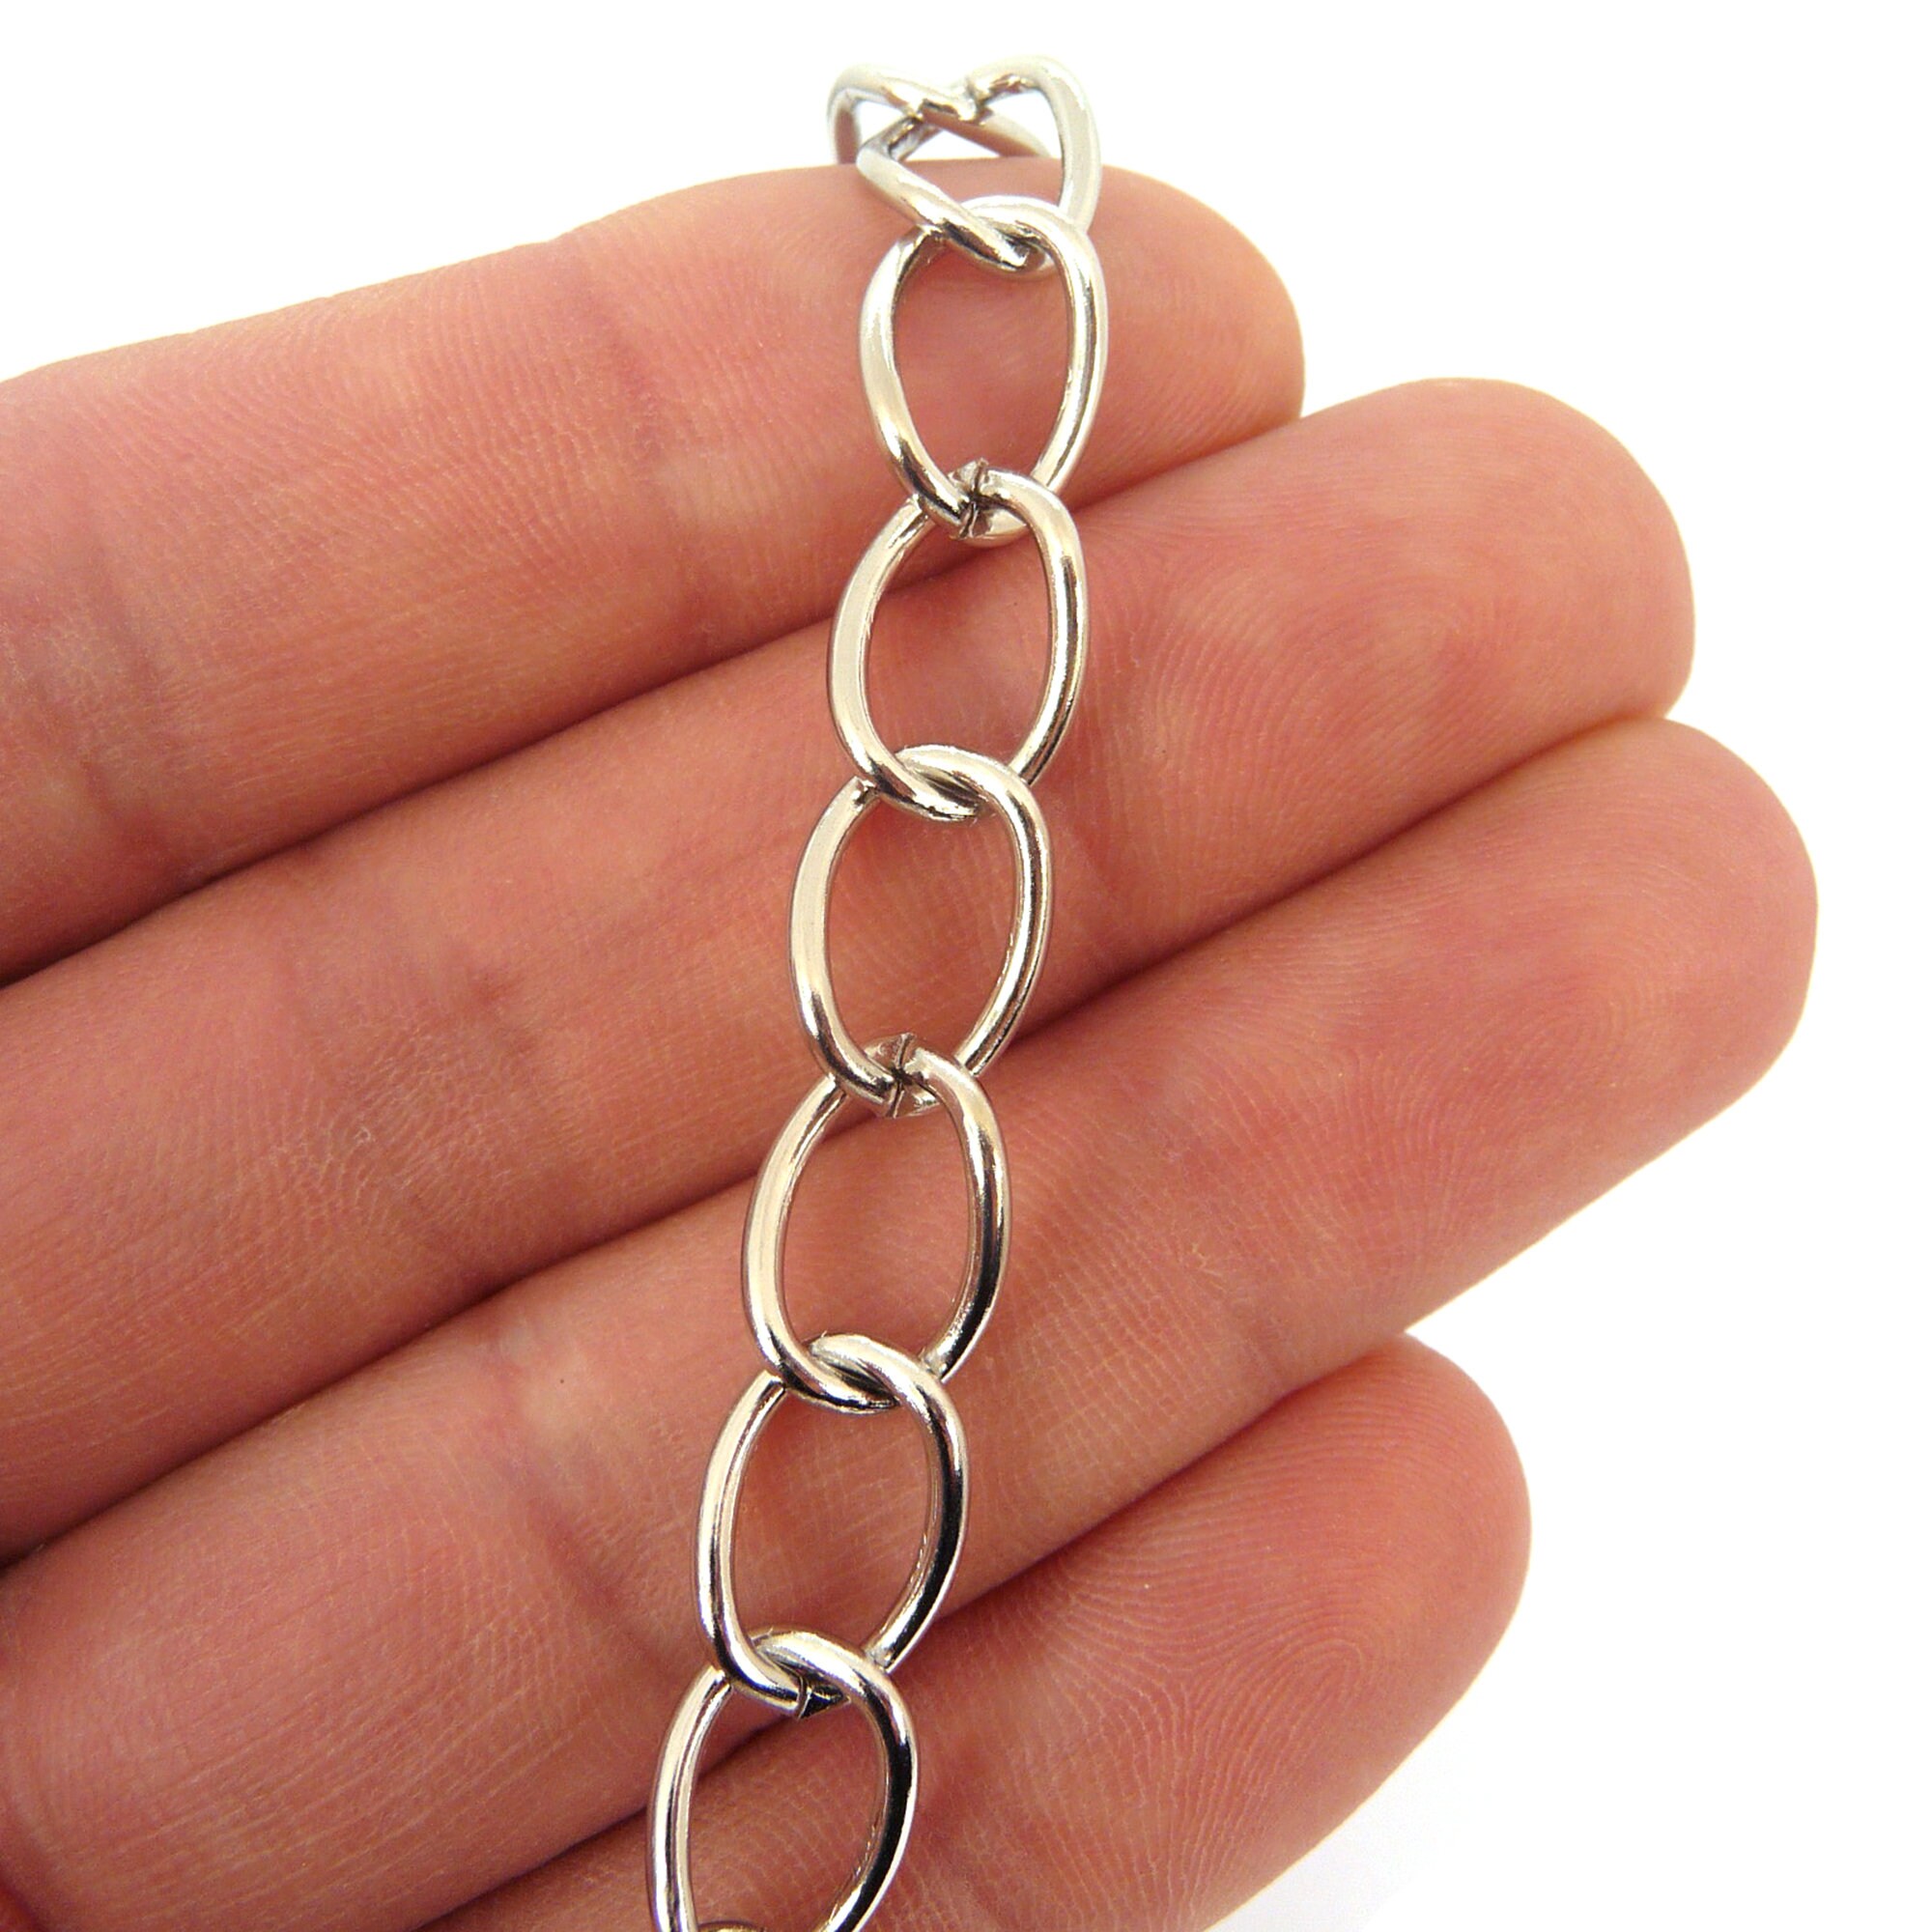 Sterling Silver Flat Oval Chain 3x4mm Italy Unfinished Bulk 10 Feet